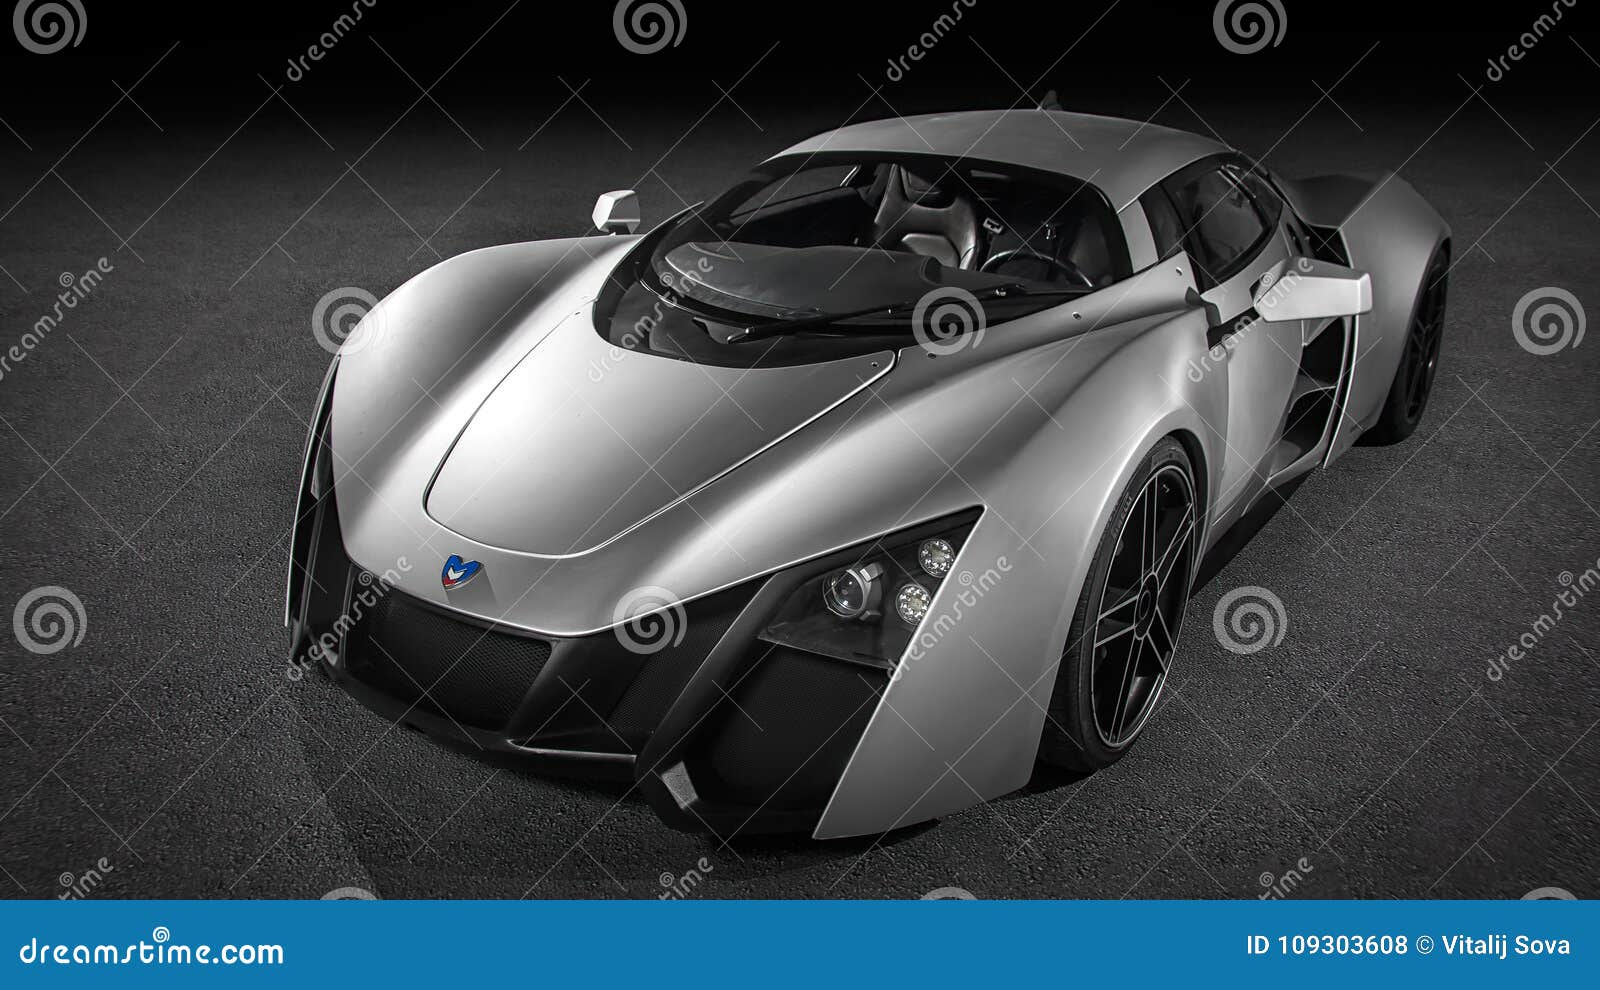 Marussia B2 Front View Editorial Stock Photo Image Of Isolated